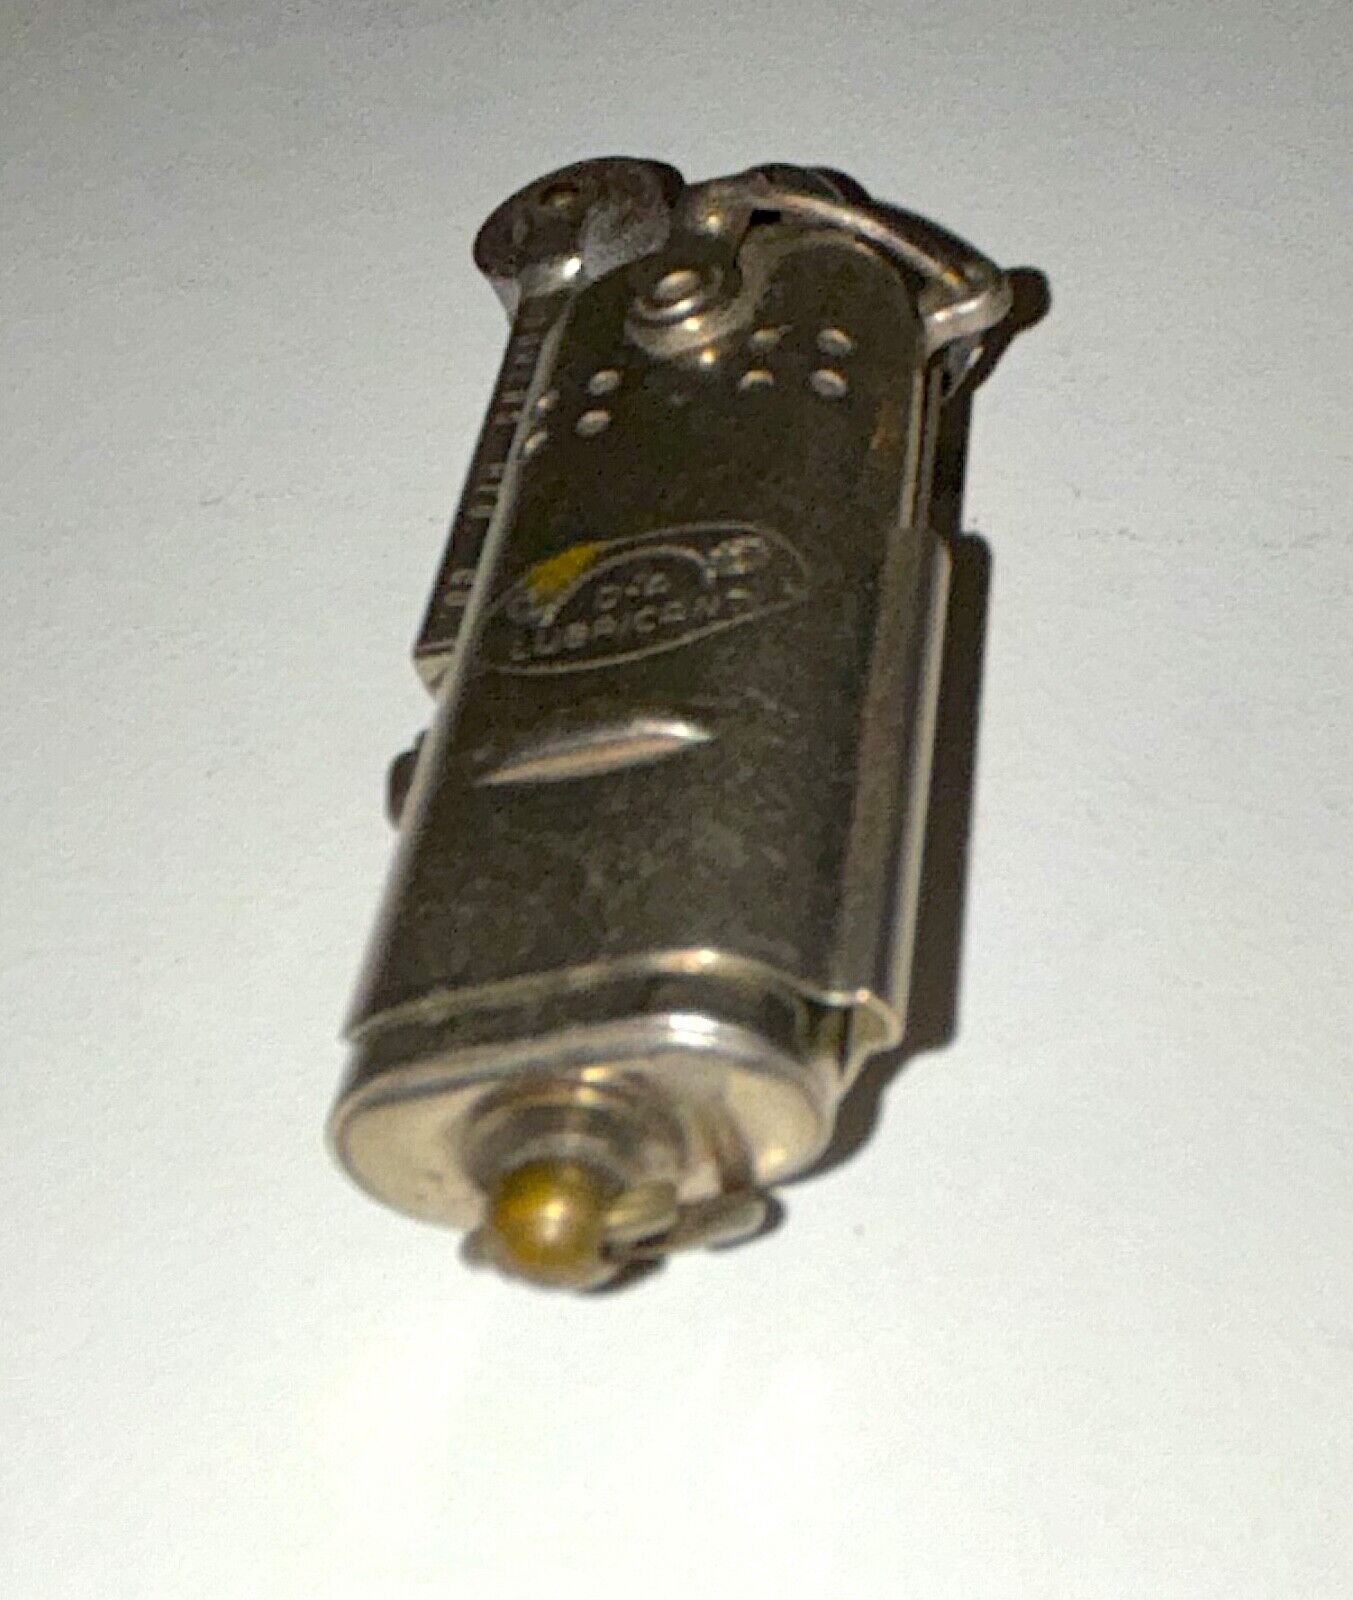 WW11 Trench-era Bowers Lighter for D A Lubricant Oil Products, Kalamazoo Mich.